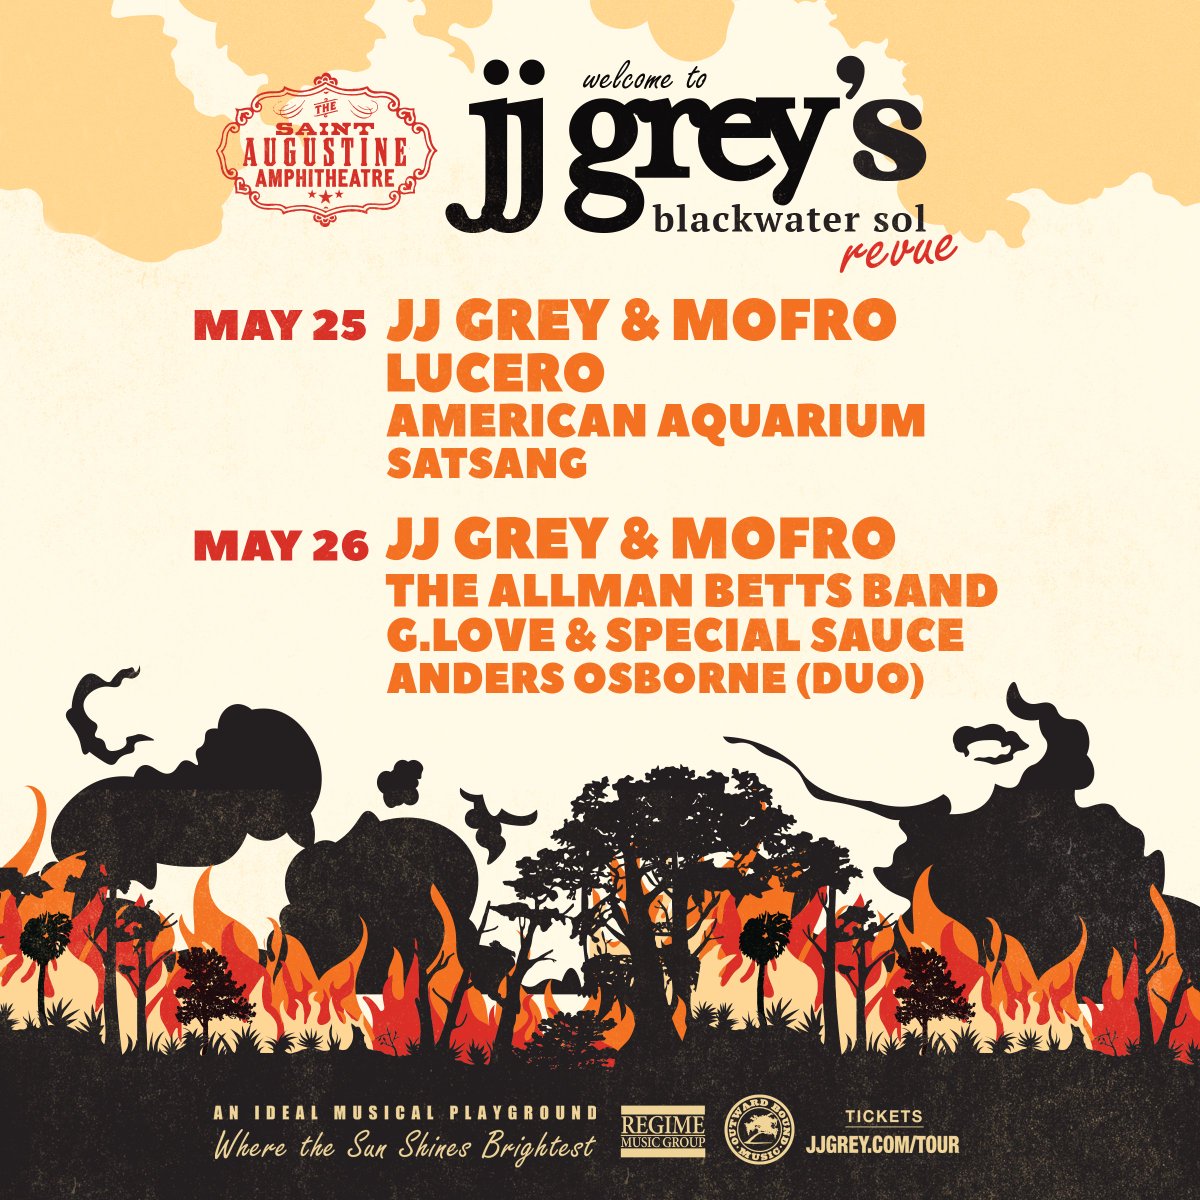 Pretty damn excited to be part of this incredible lineup. See you on May 25th in St. Augustine at @theampsa for @JJGREYandMOFRO Blackwater Sol Revue. Coming down with a special acoustic solo set. @luceromusic American Aquarium @allmanbettsband @glove Anders Osborne